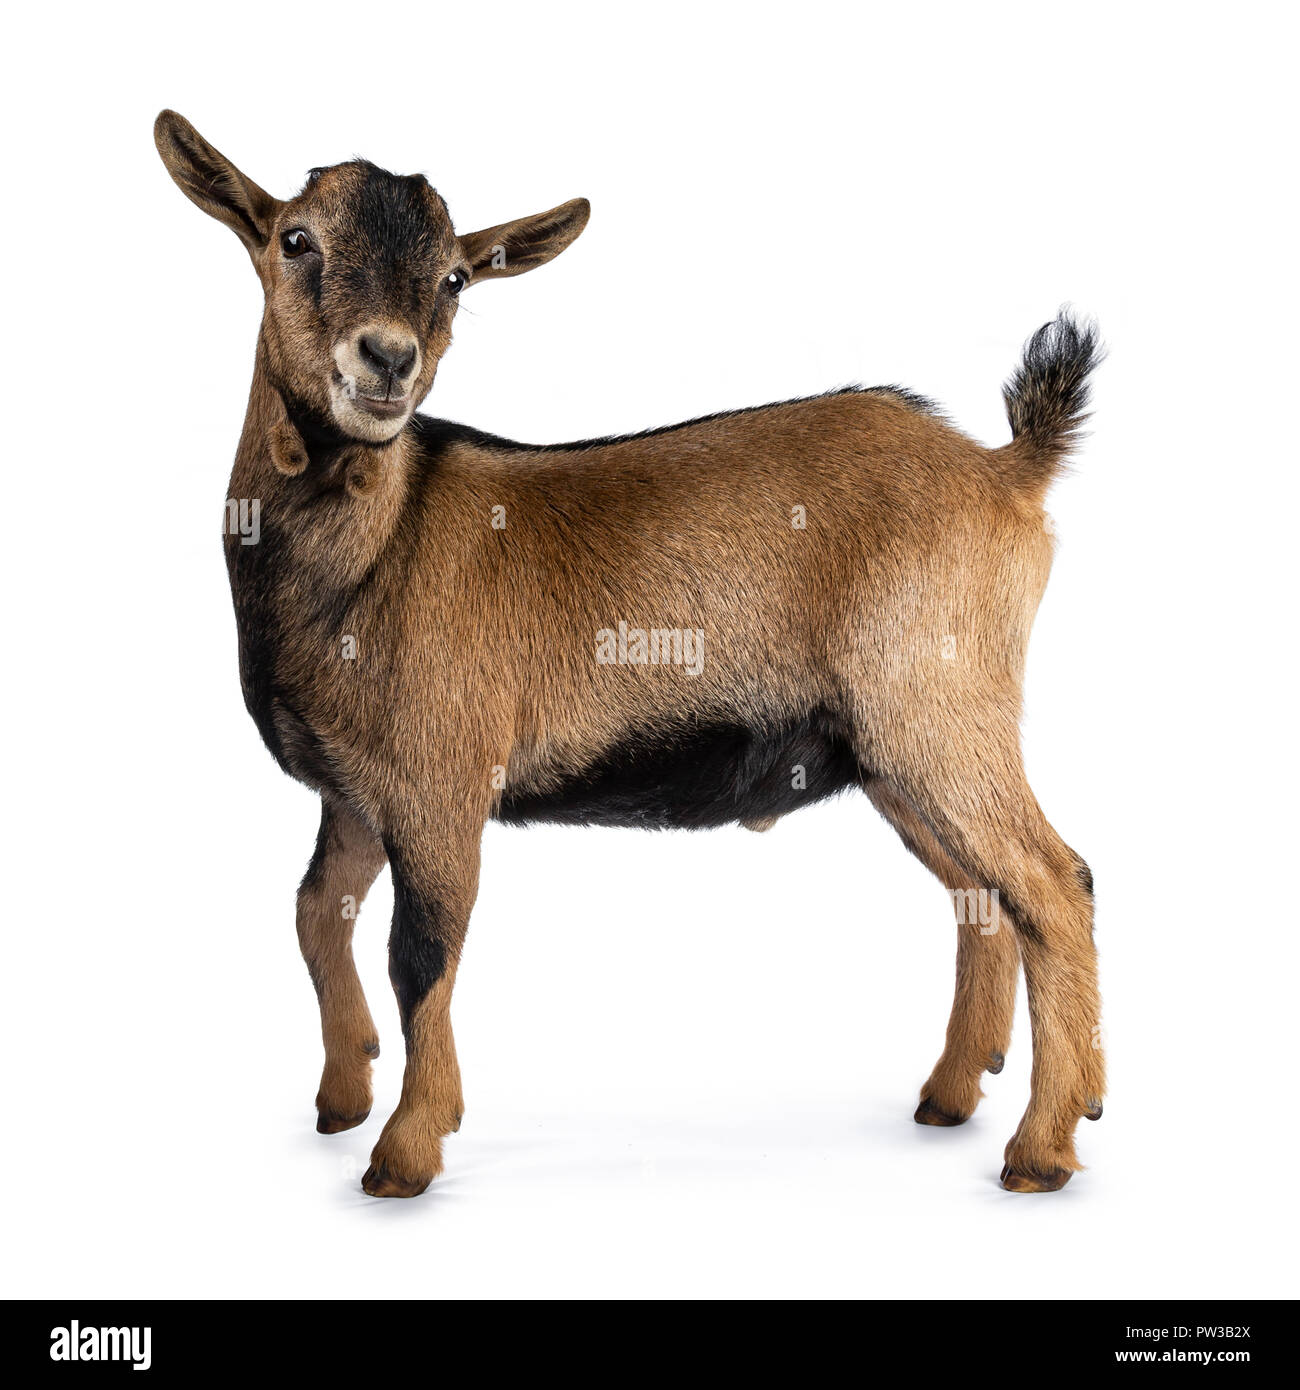 Brown agouti pygmy goat standing side ways with head turned and looking to camera, isolated on white background Stock Photo